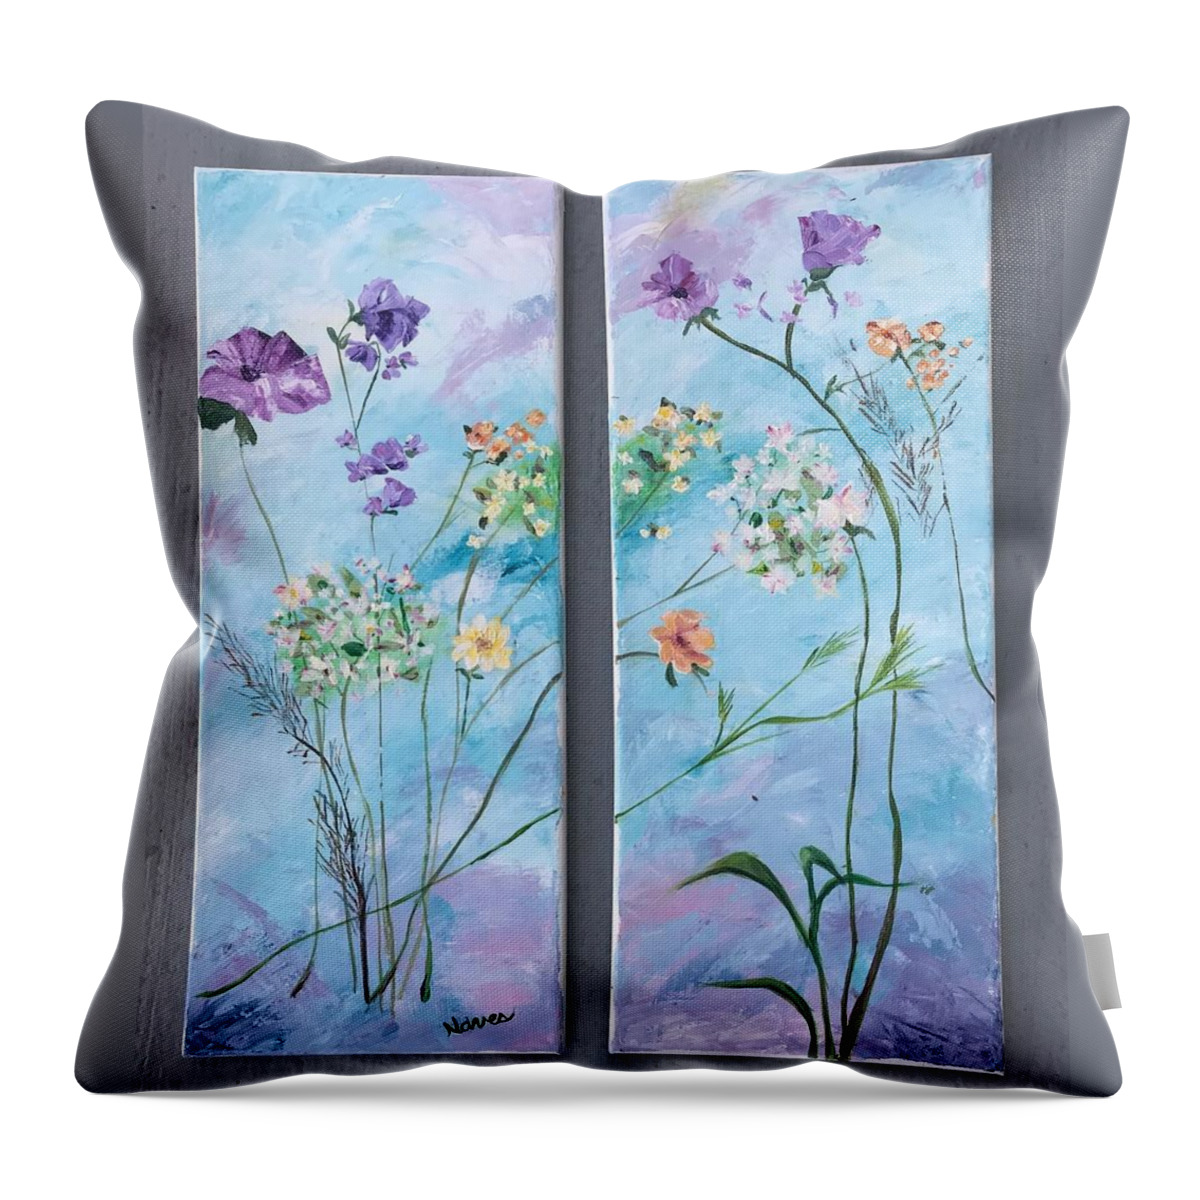 Wild Flowers Throw Pillow featuring the painting Wild Flowers Diptych by Deborah Naves